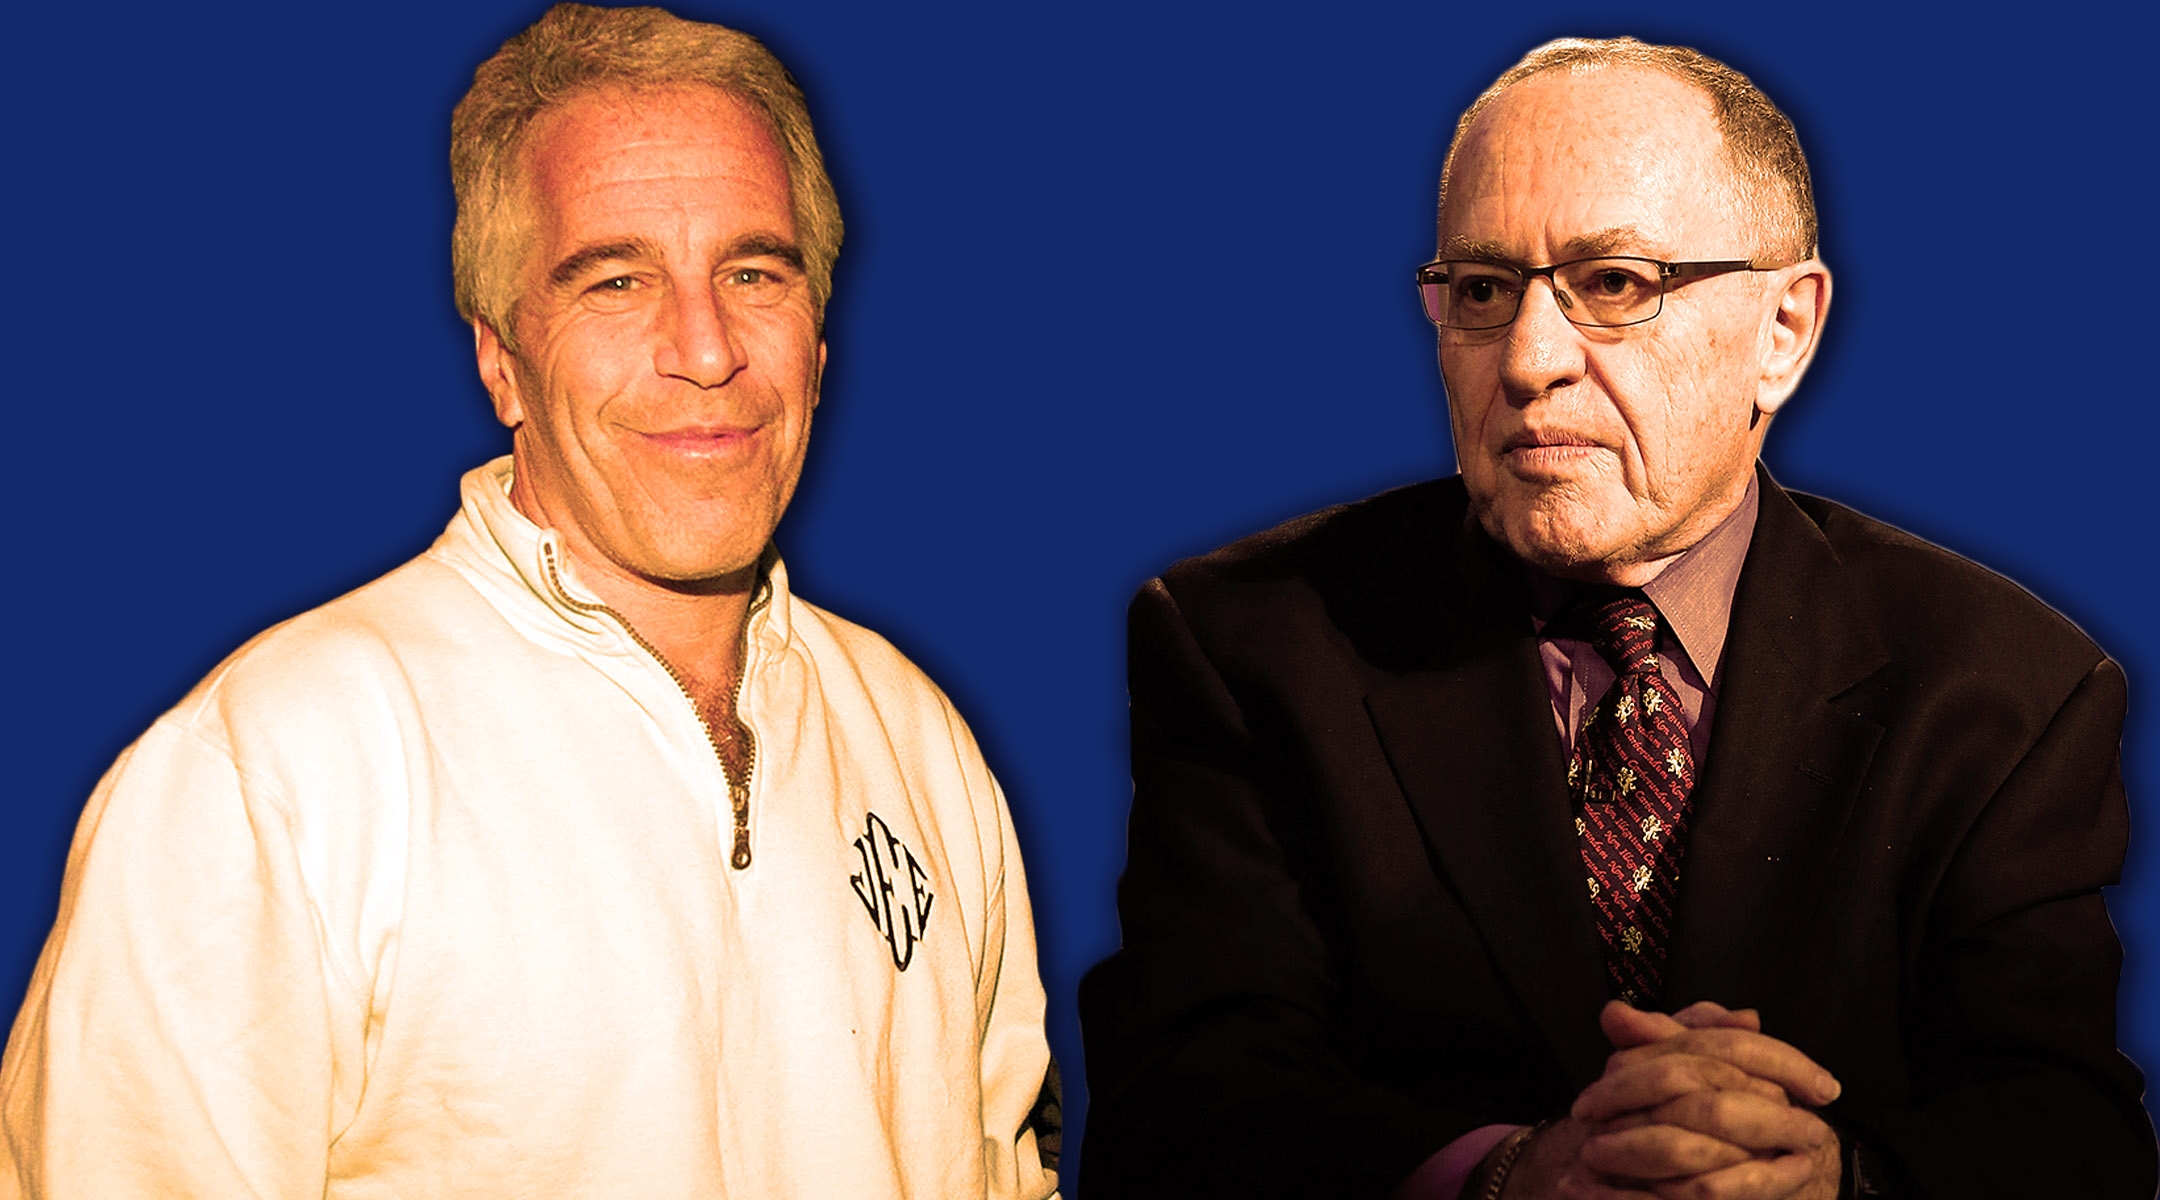 Alan Dershowitz (right) represented sex offender Jeffrey Epstein in a controversial 2008 plea deal and, previously, would send him copies of his books to review before publication. (JTA illustration by Laura Adkins)